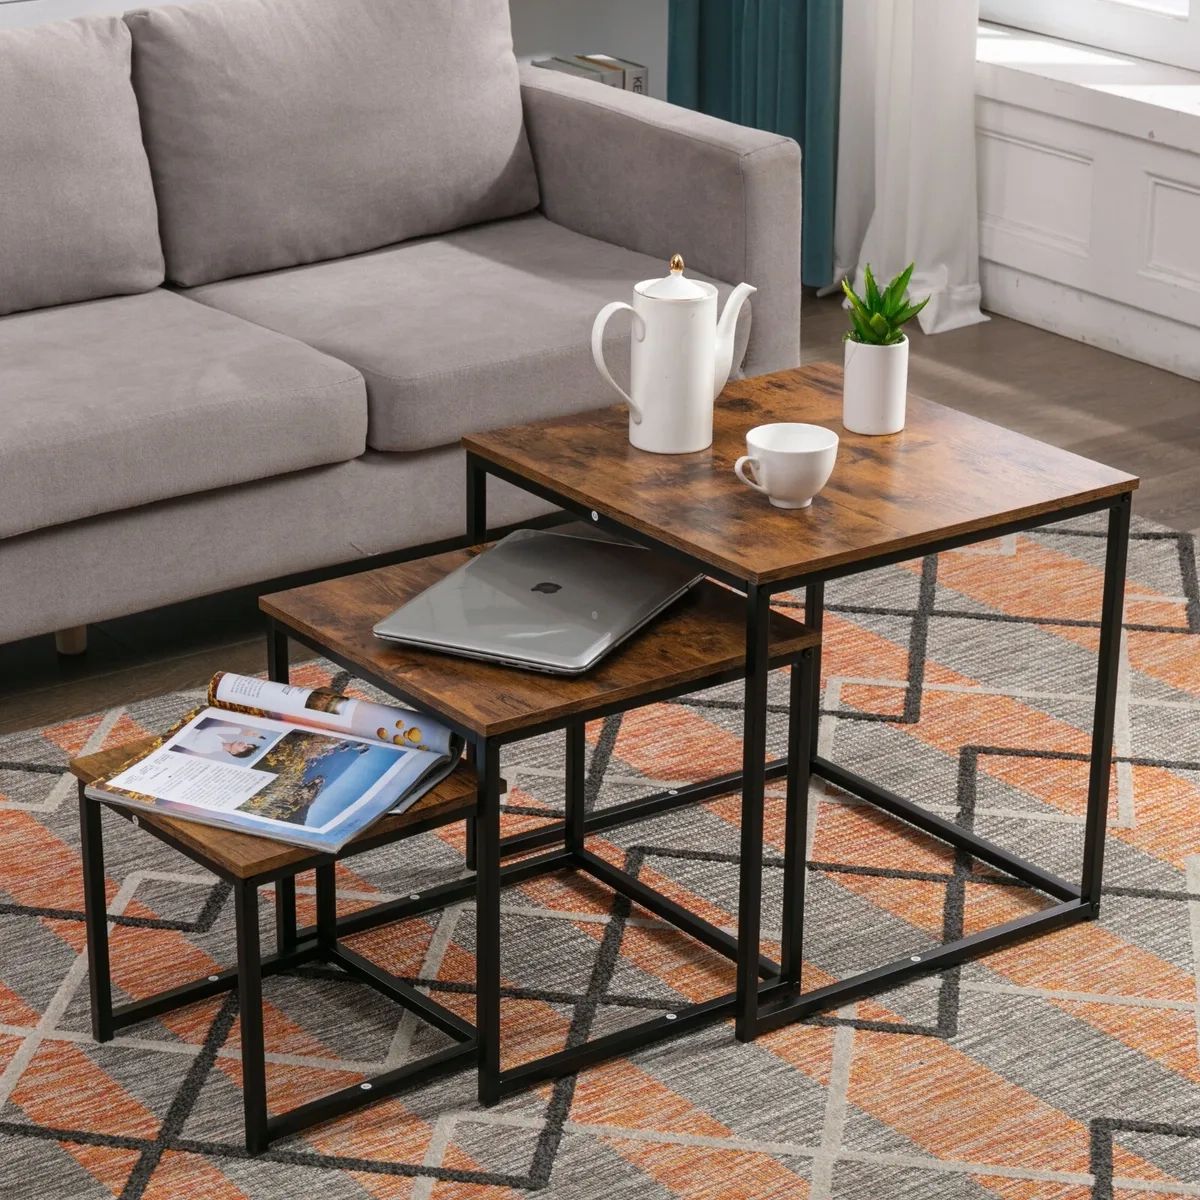 Nest Coffee Table 3 In 1 Set Compact Modern Design For Space Saving For Any  Room | Ebay With Regard To Coffee Tables Of 3 Nesting Tables (View 5 of 15)